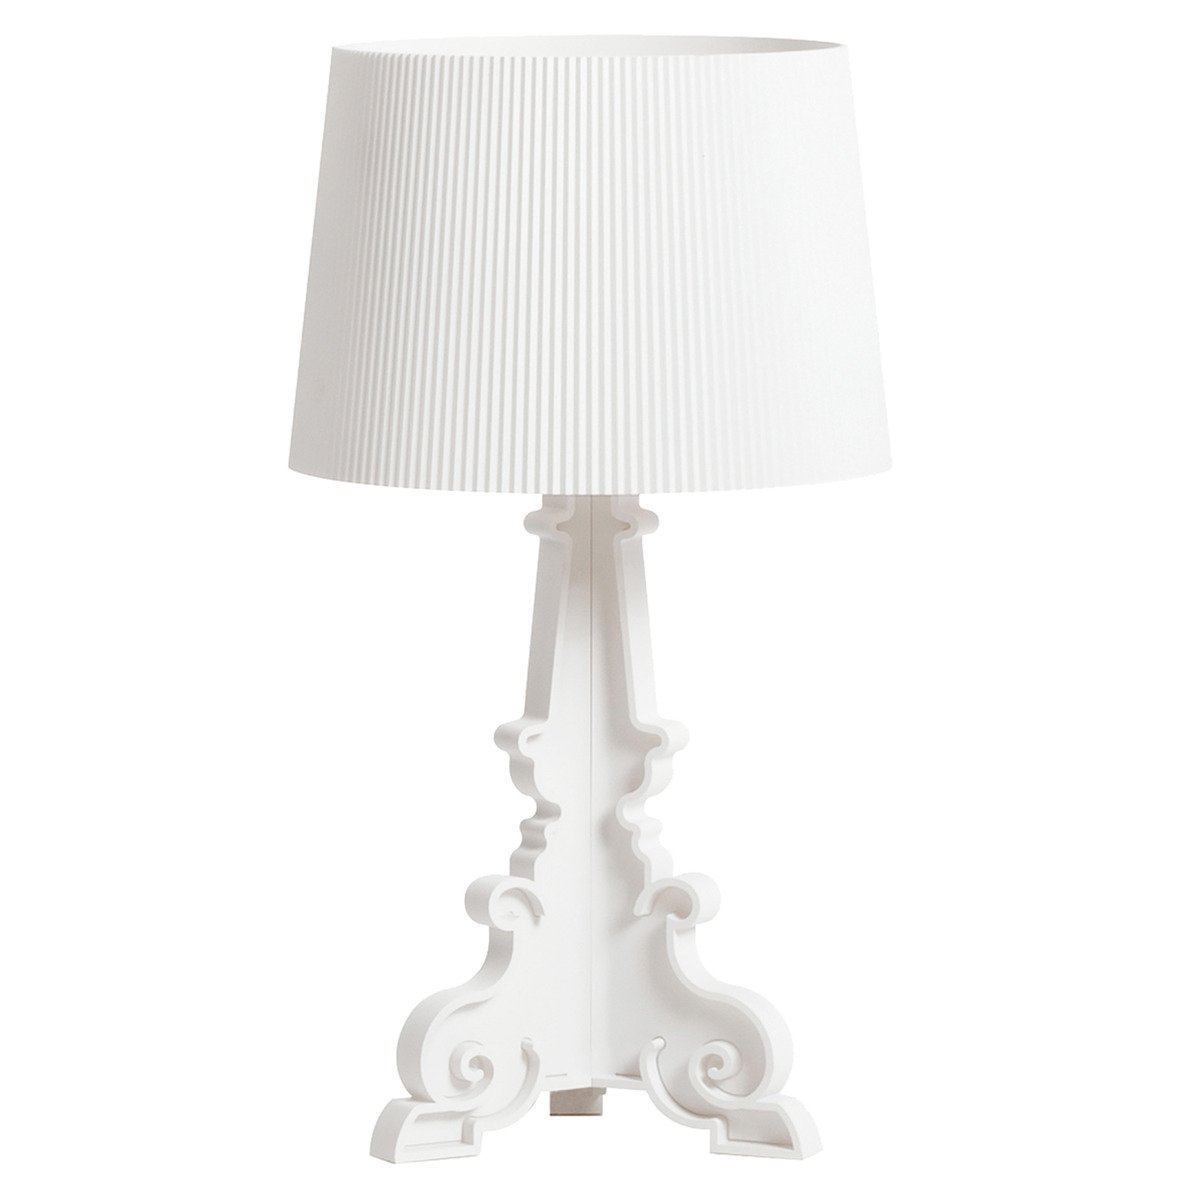 Kartell Bourgie Table Lamp Matt White, Blue And White Table Lamps Nz